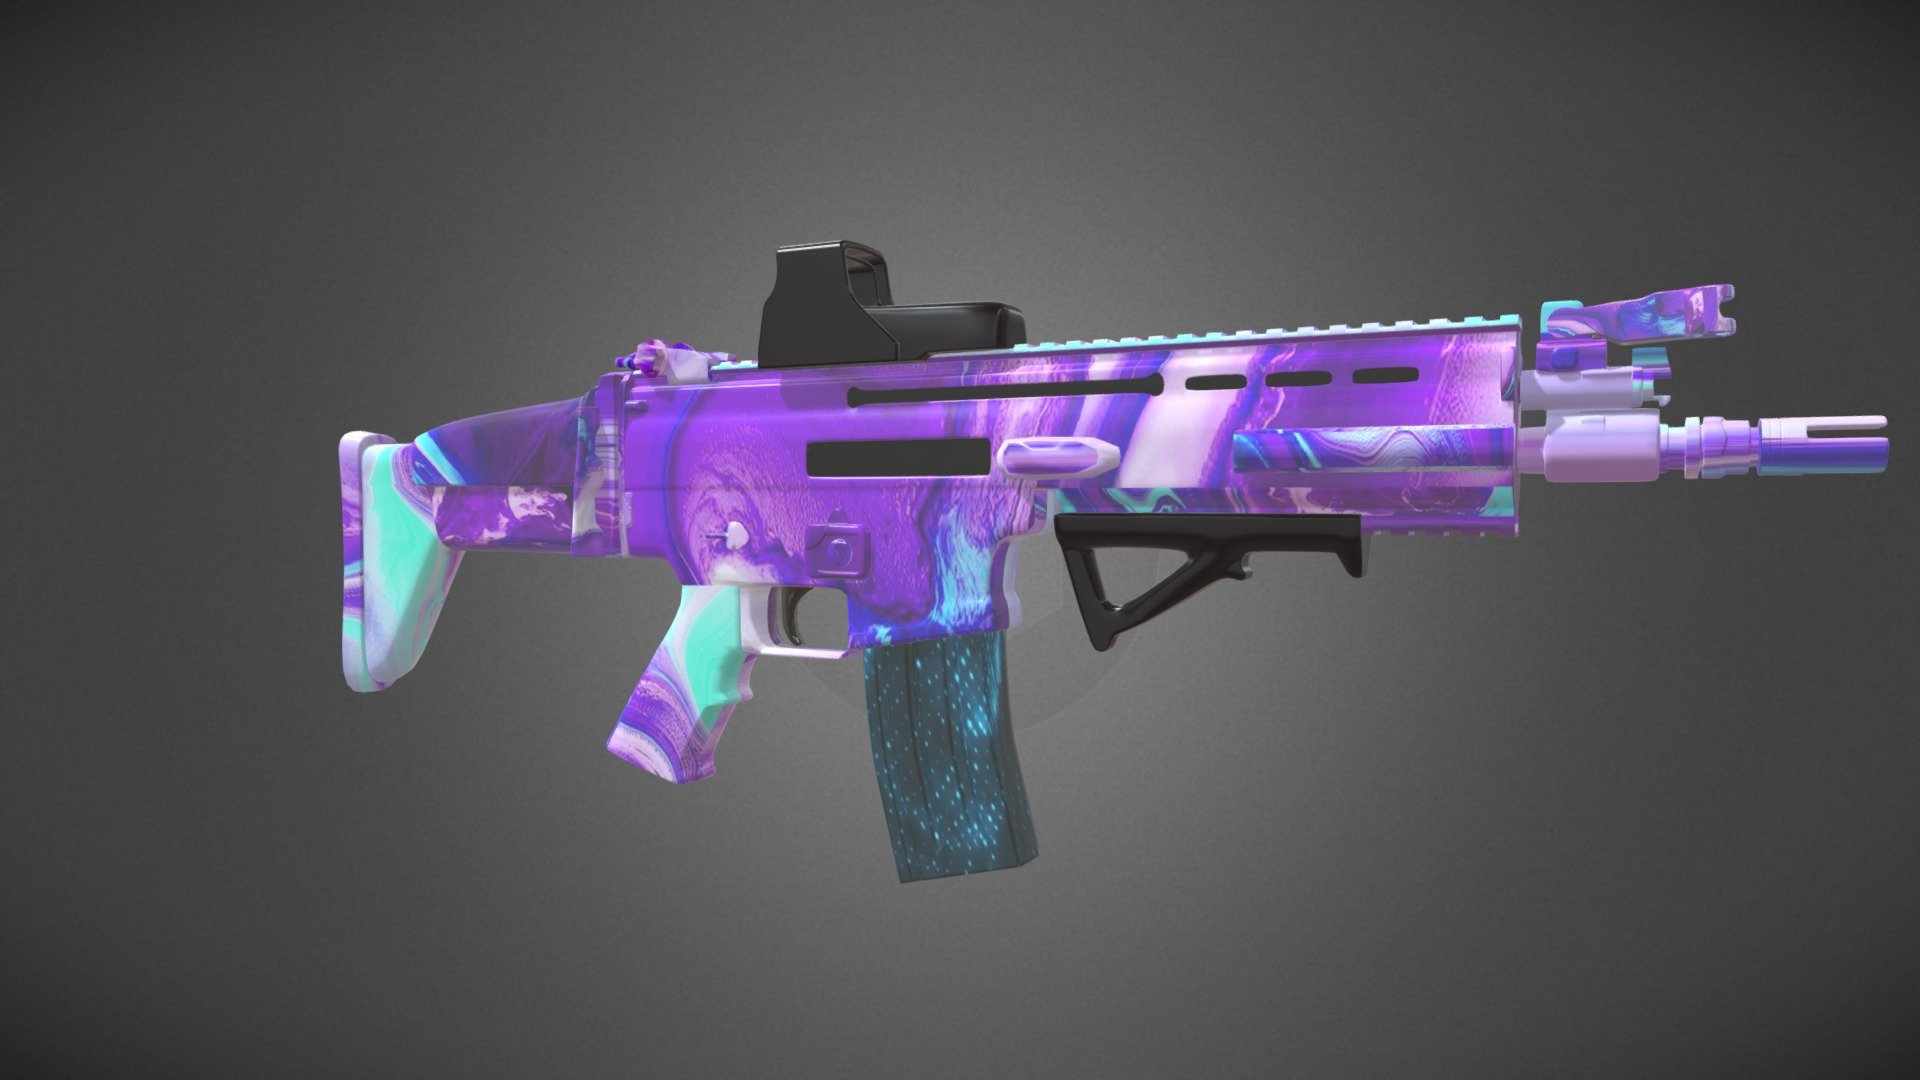 Scar L Water Blaster Holographic Sight Download Free 3d Model By Abhay Singh Abhays 8d857d1